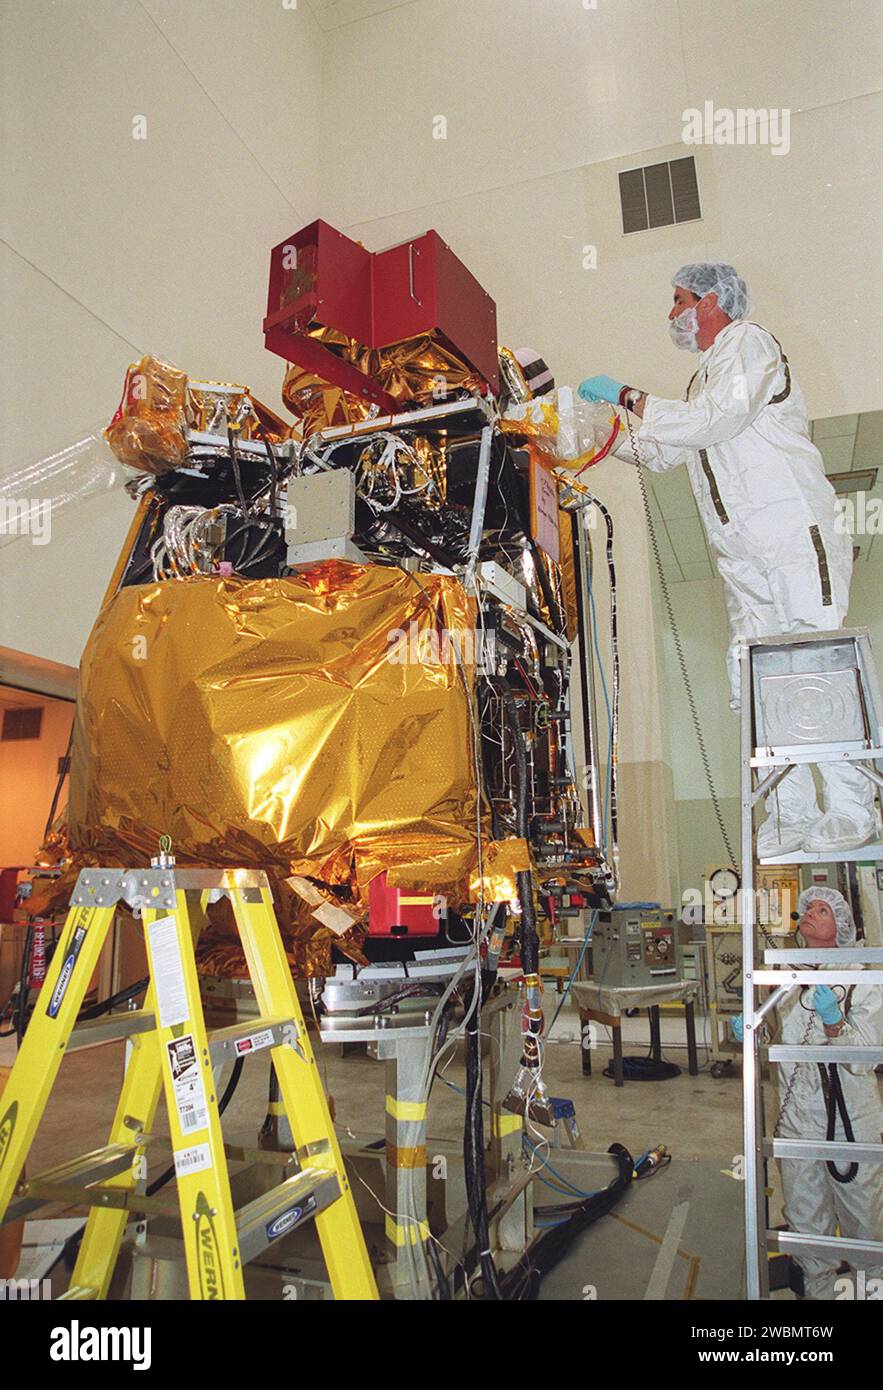 In the Spacecraft Assembly and Encapsulation Facility 2 (SAEF-2), workers prepare to remove the High Energy Neutron Detector (HEND), part of the Gamma Ray Spectrometer (GRS), from the 2001 Mars Odyssey Orbiter. The HEND was built by Russia’s Space Research Institute (IKI). The GRS will achieve global mapping of the elemental composition of the surface and determine the abundance of hydrogen in the shallow subsurface. The orbiter will carry two other science instruments THEMIS and the Mars Radiation Environment Experiment (MARIE). THEMIS will map the mineralogy and morphology of the Martian sur Stock Photo